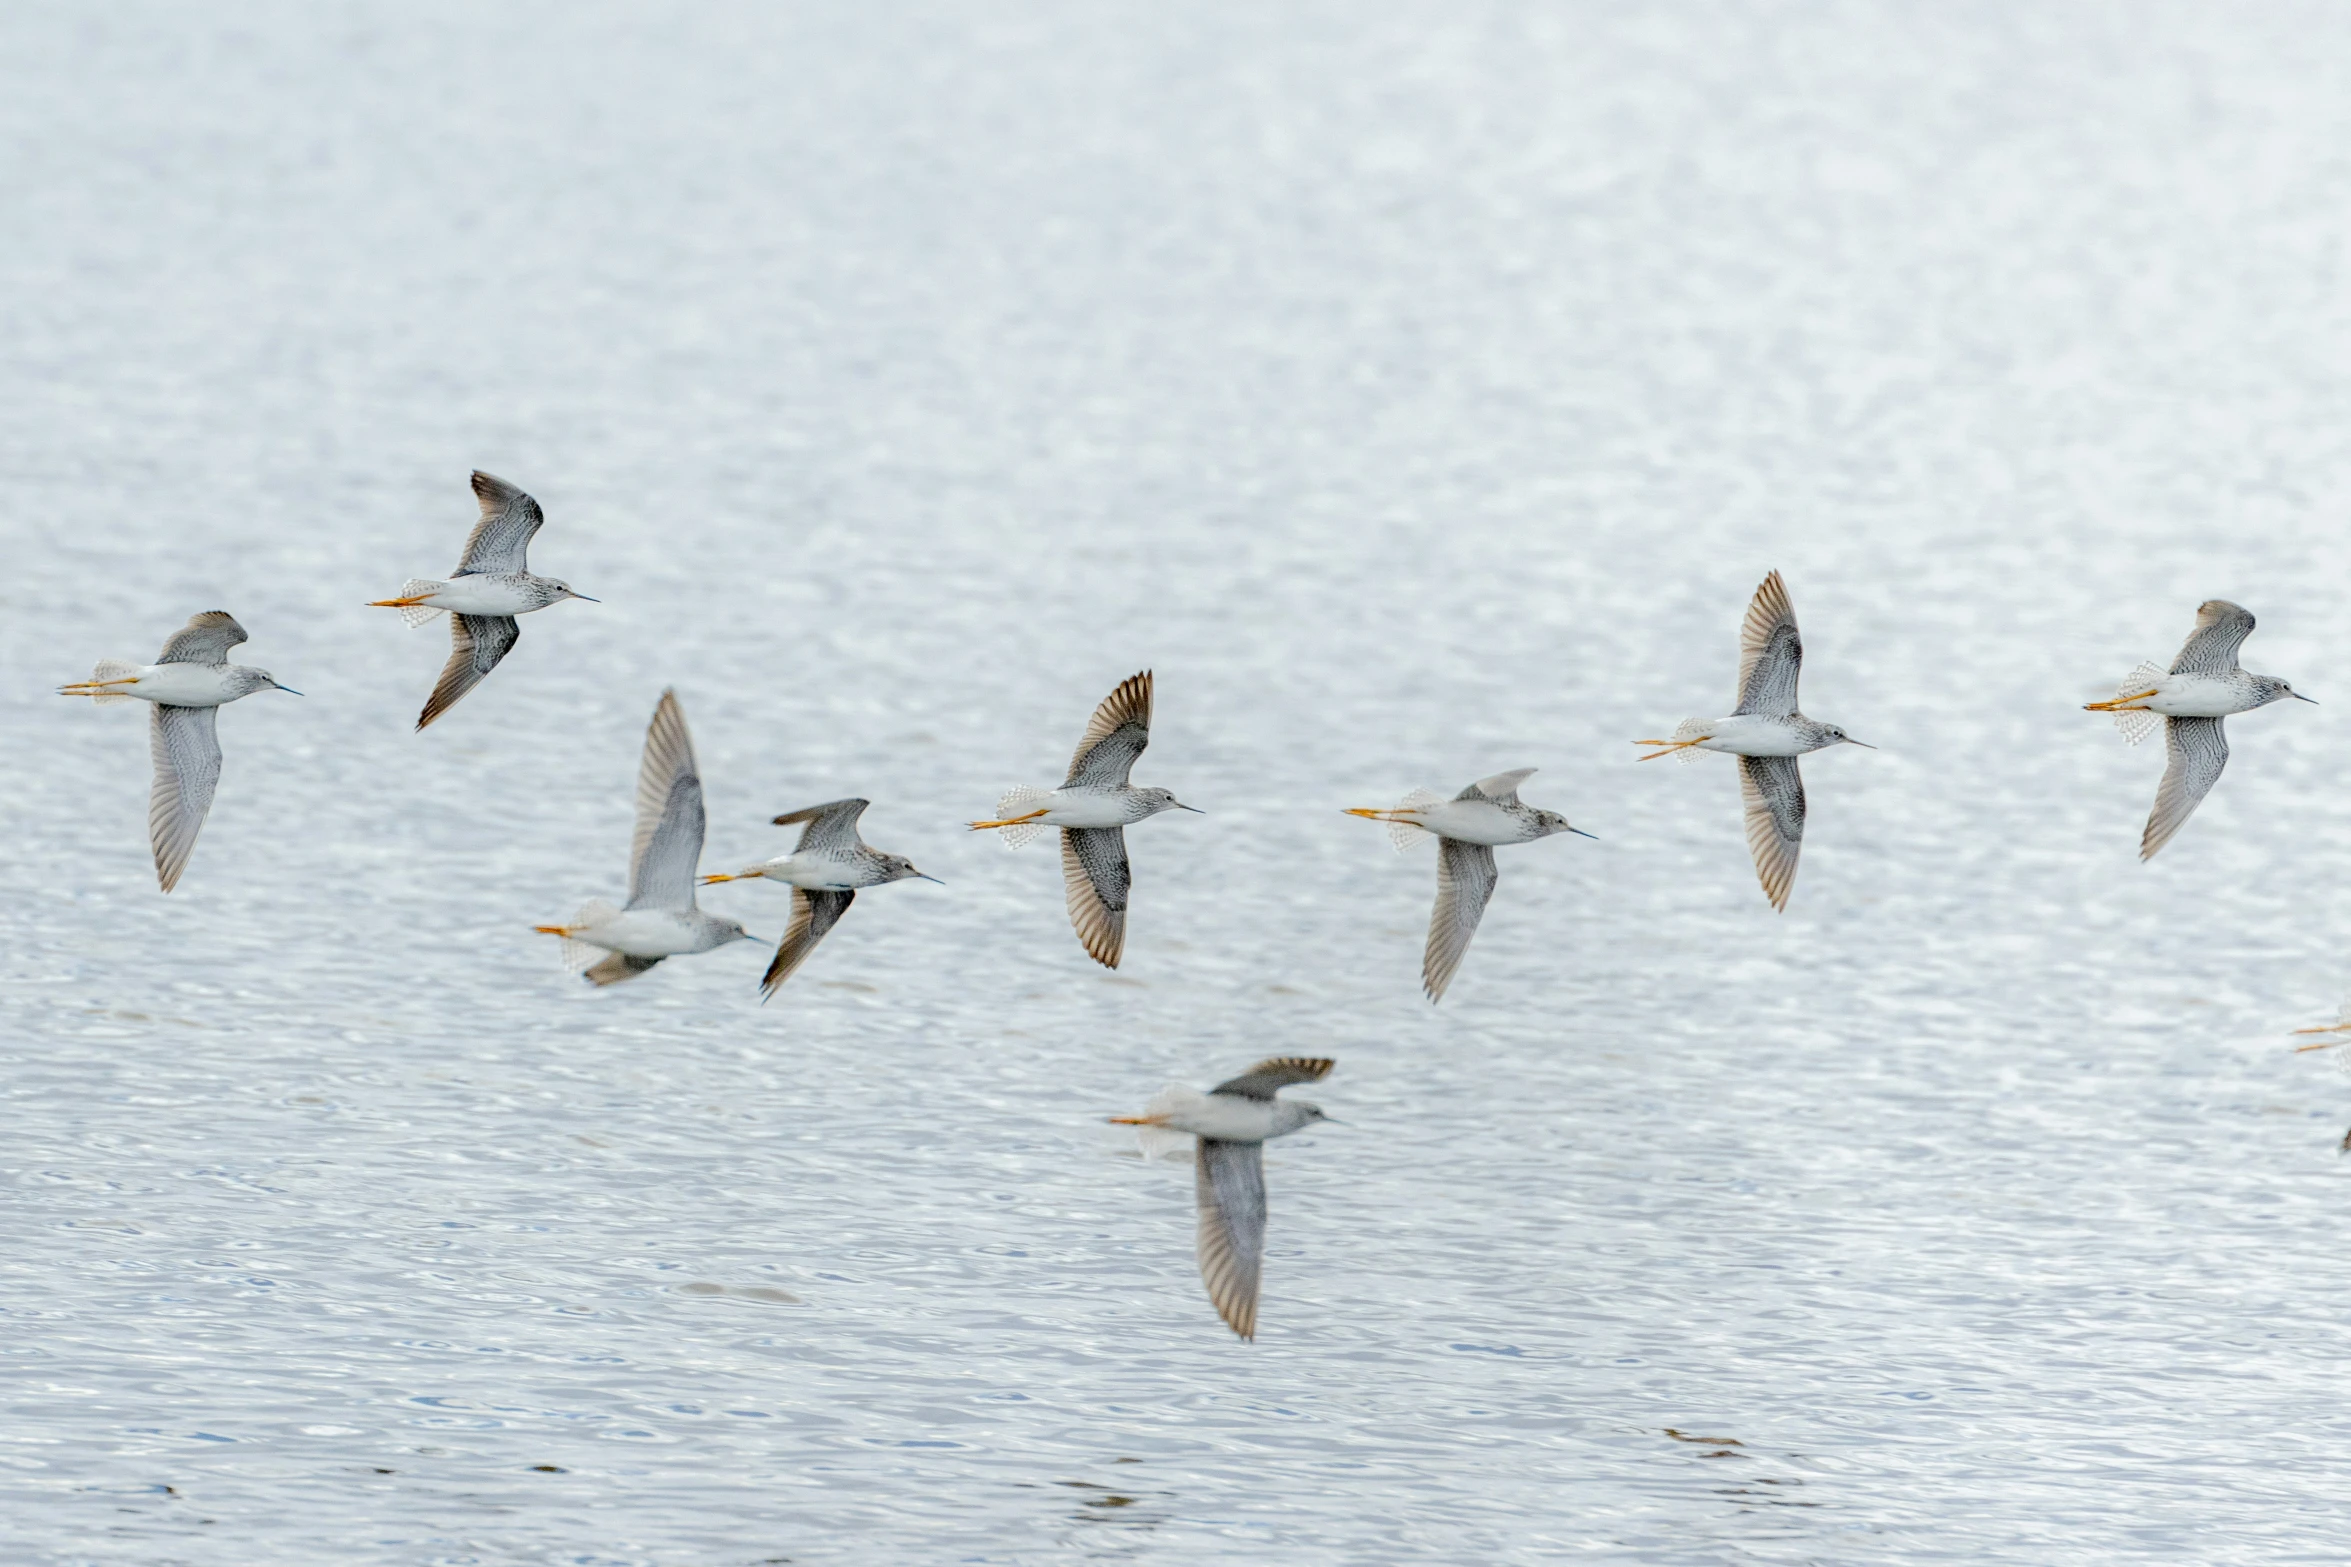 a group of birds flying low over water